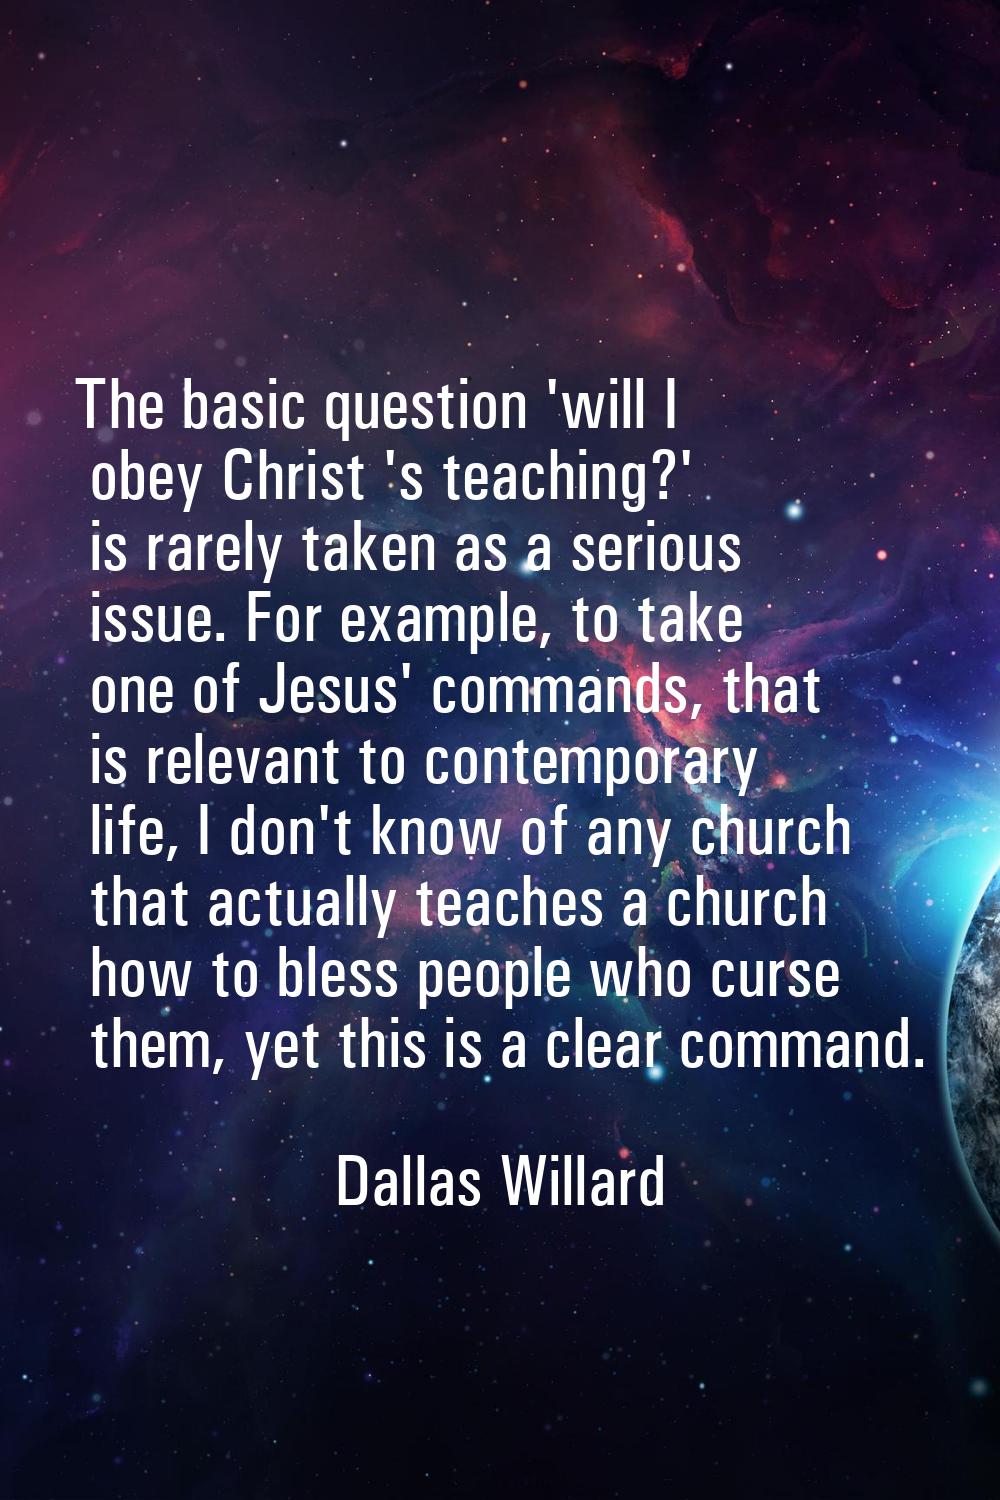 The basic question 'will I obey Christ 's teaching?' is rarely taken as a serious issue. For exampl